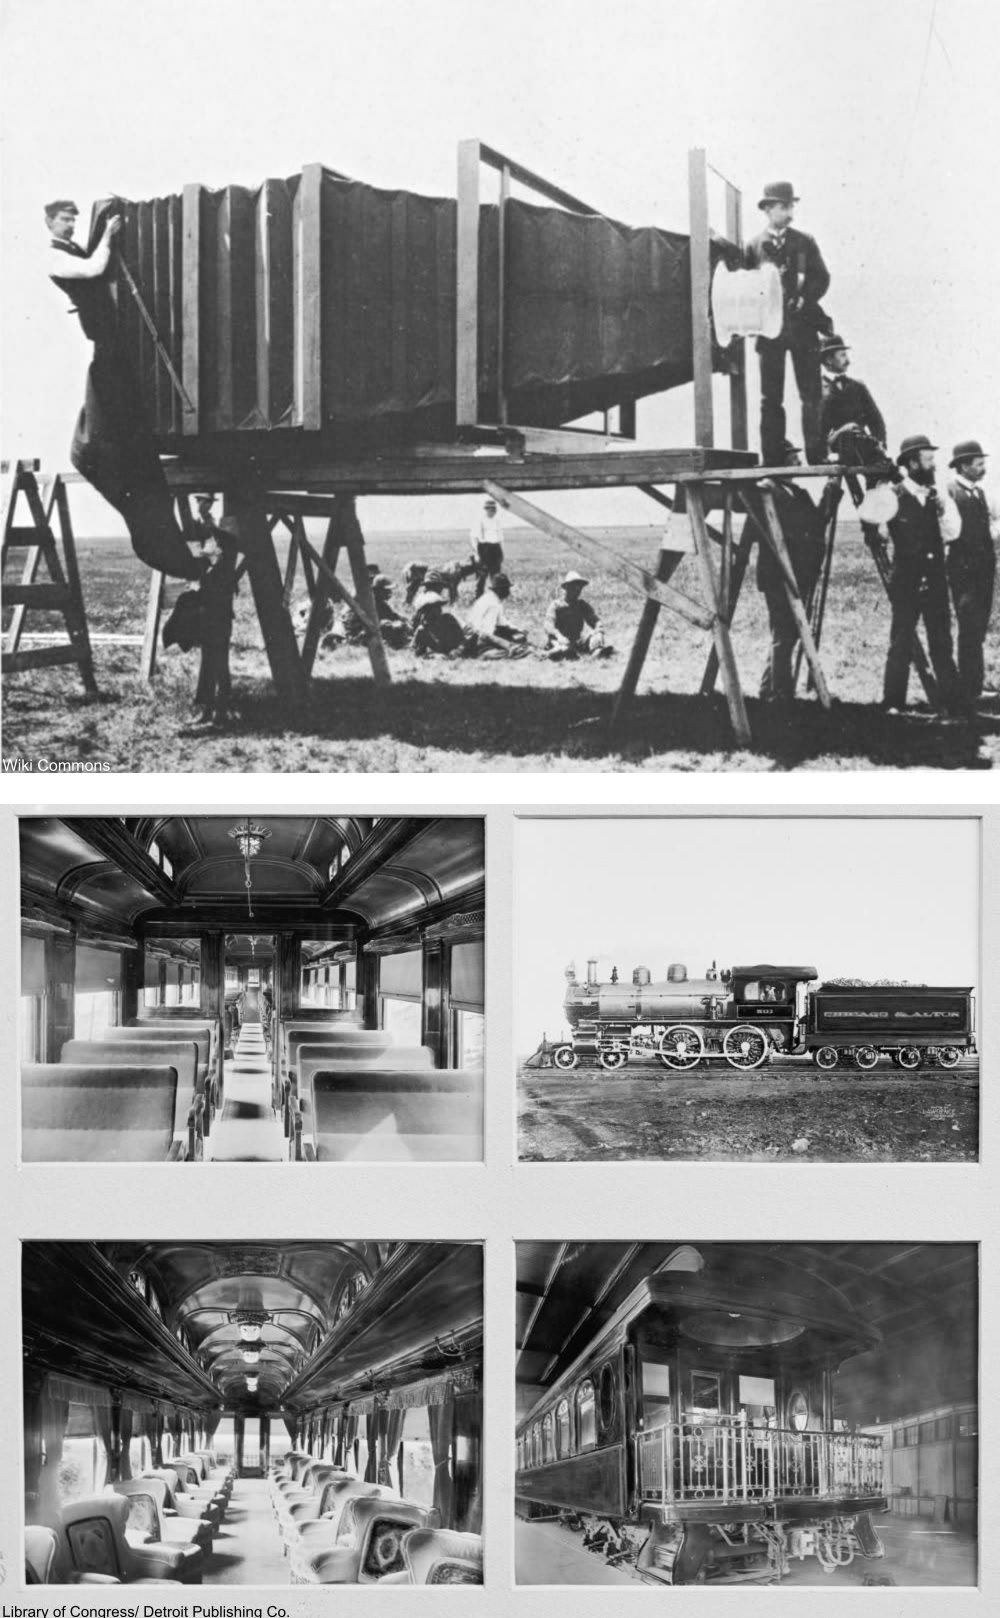 The First Largest Camera that captured extremely handsome train, 1899-1900